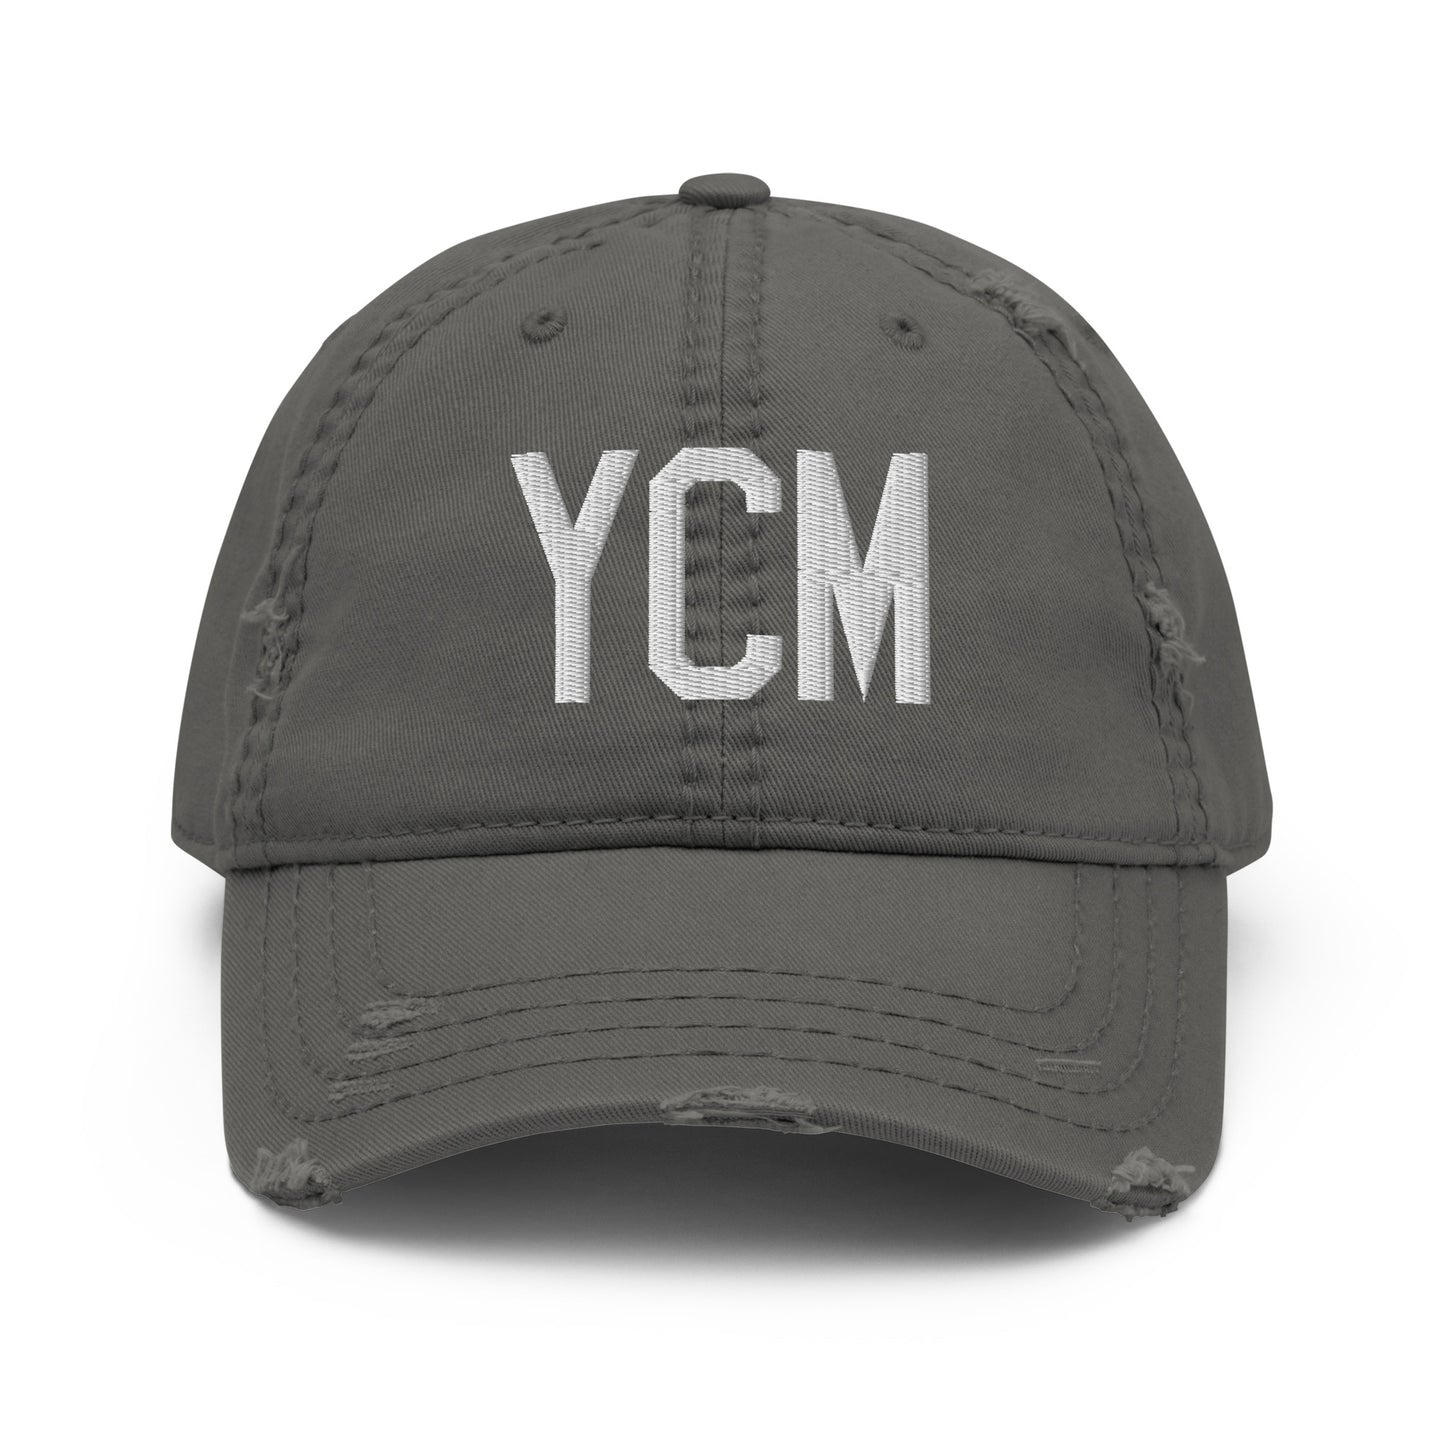 Airport Code Distressed Hat - White • YCM St. Catharines • YHM Designs - Image 15